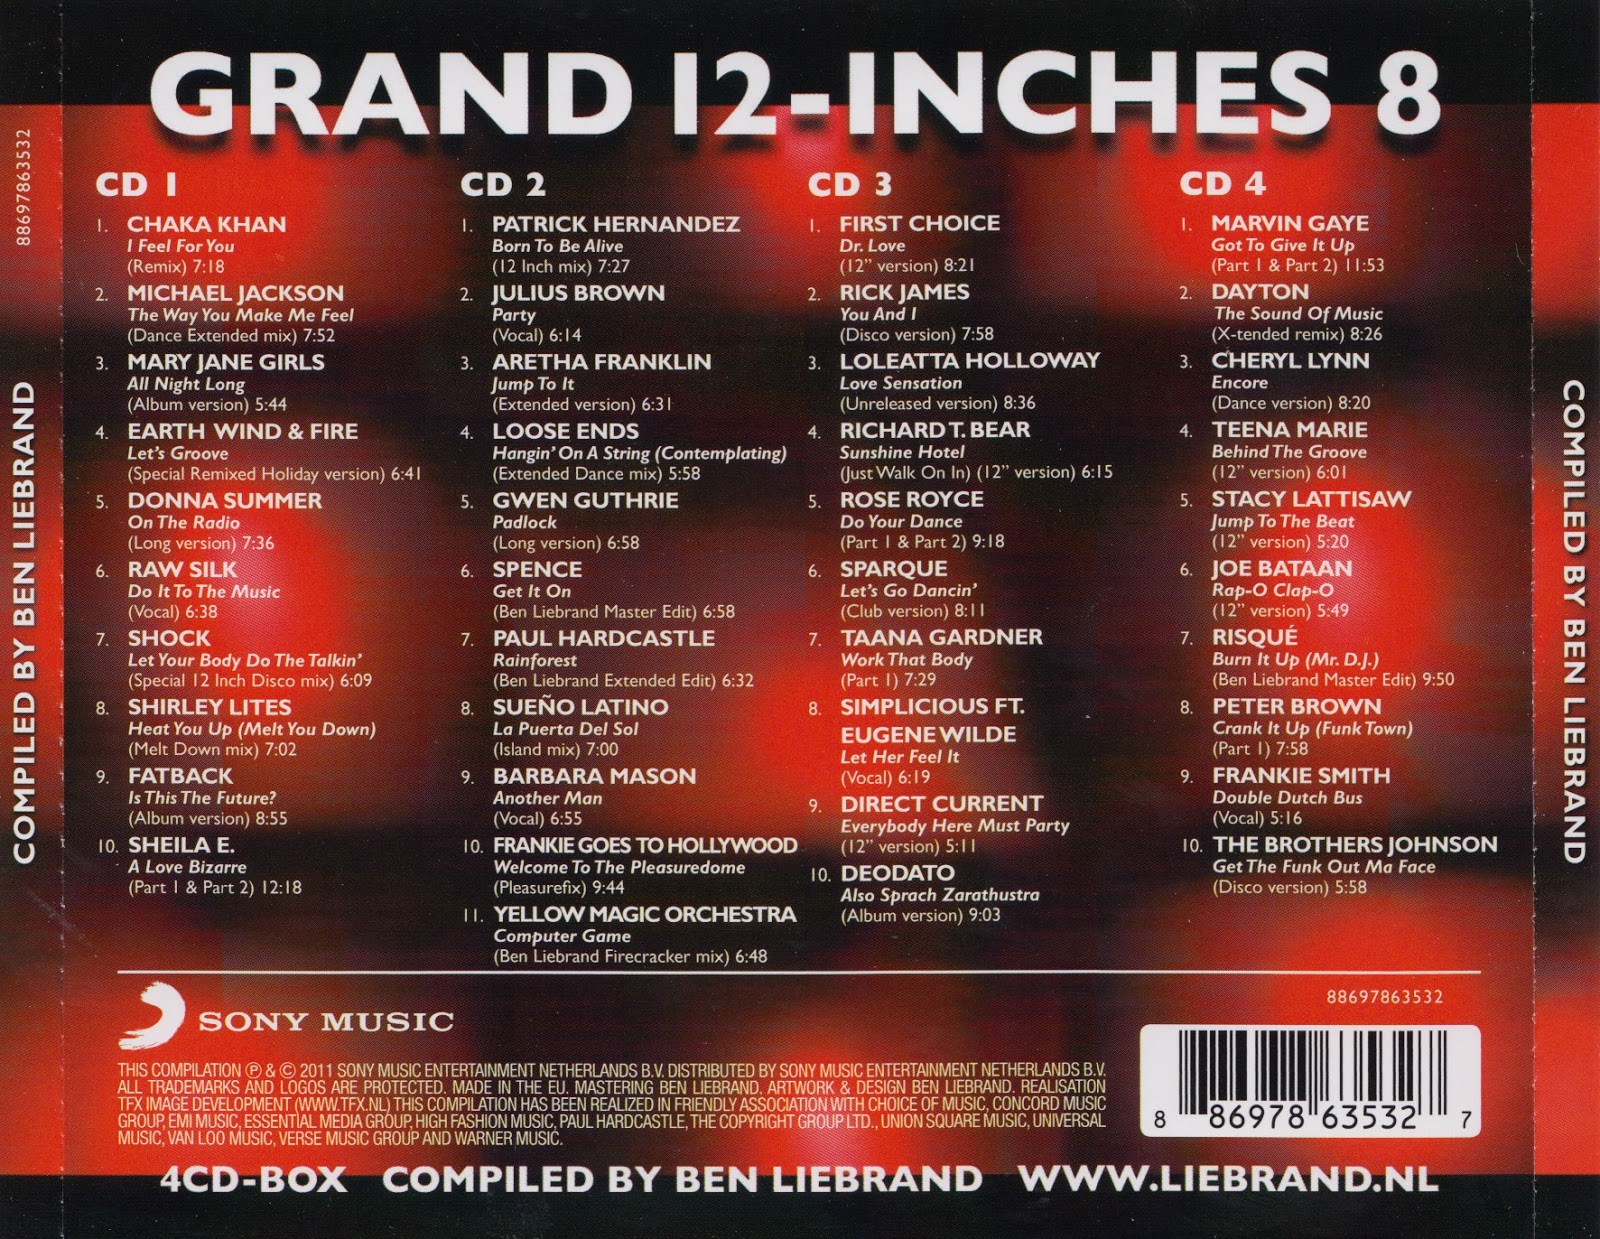 Various artists - Grand Hit collection CD. Cheryl Lynn encore Lyrics. Jan Hammer Grand 12-inches 16 (compiled by Ben Liebrand). Flac 2011